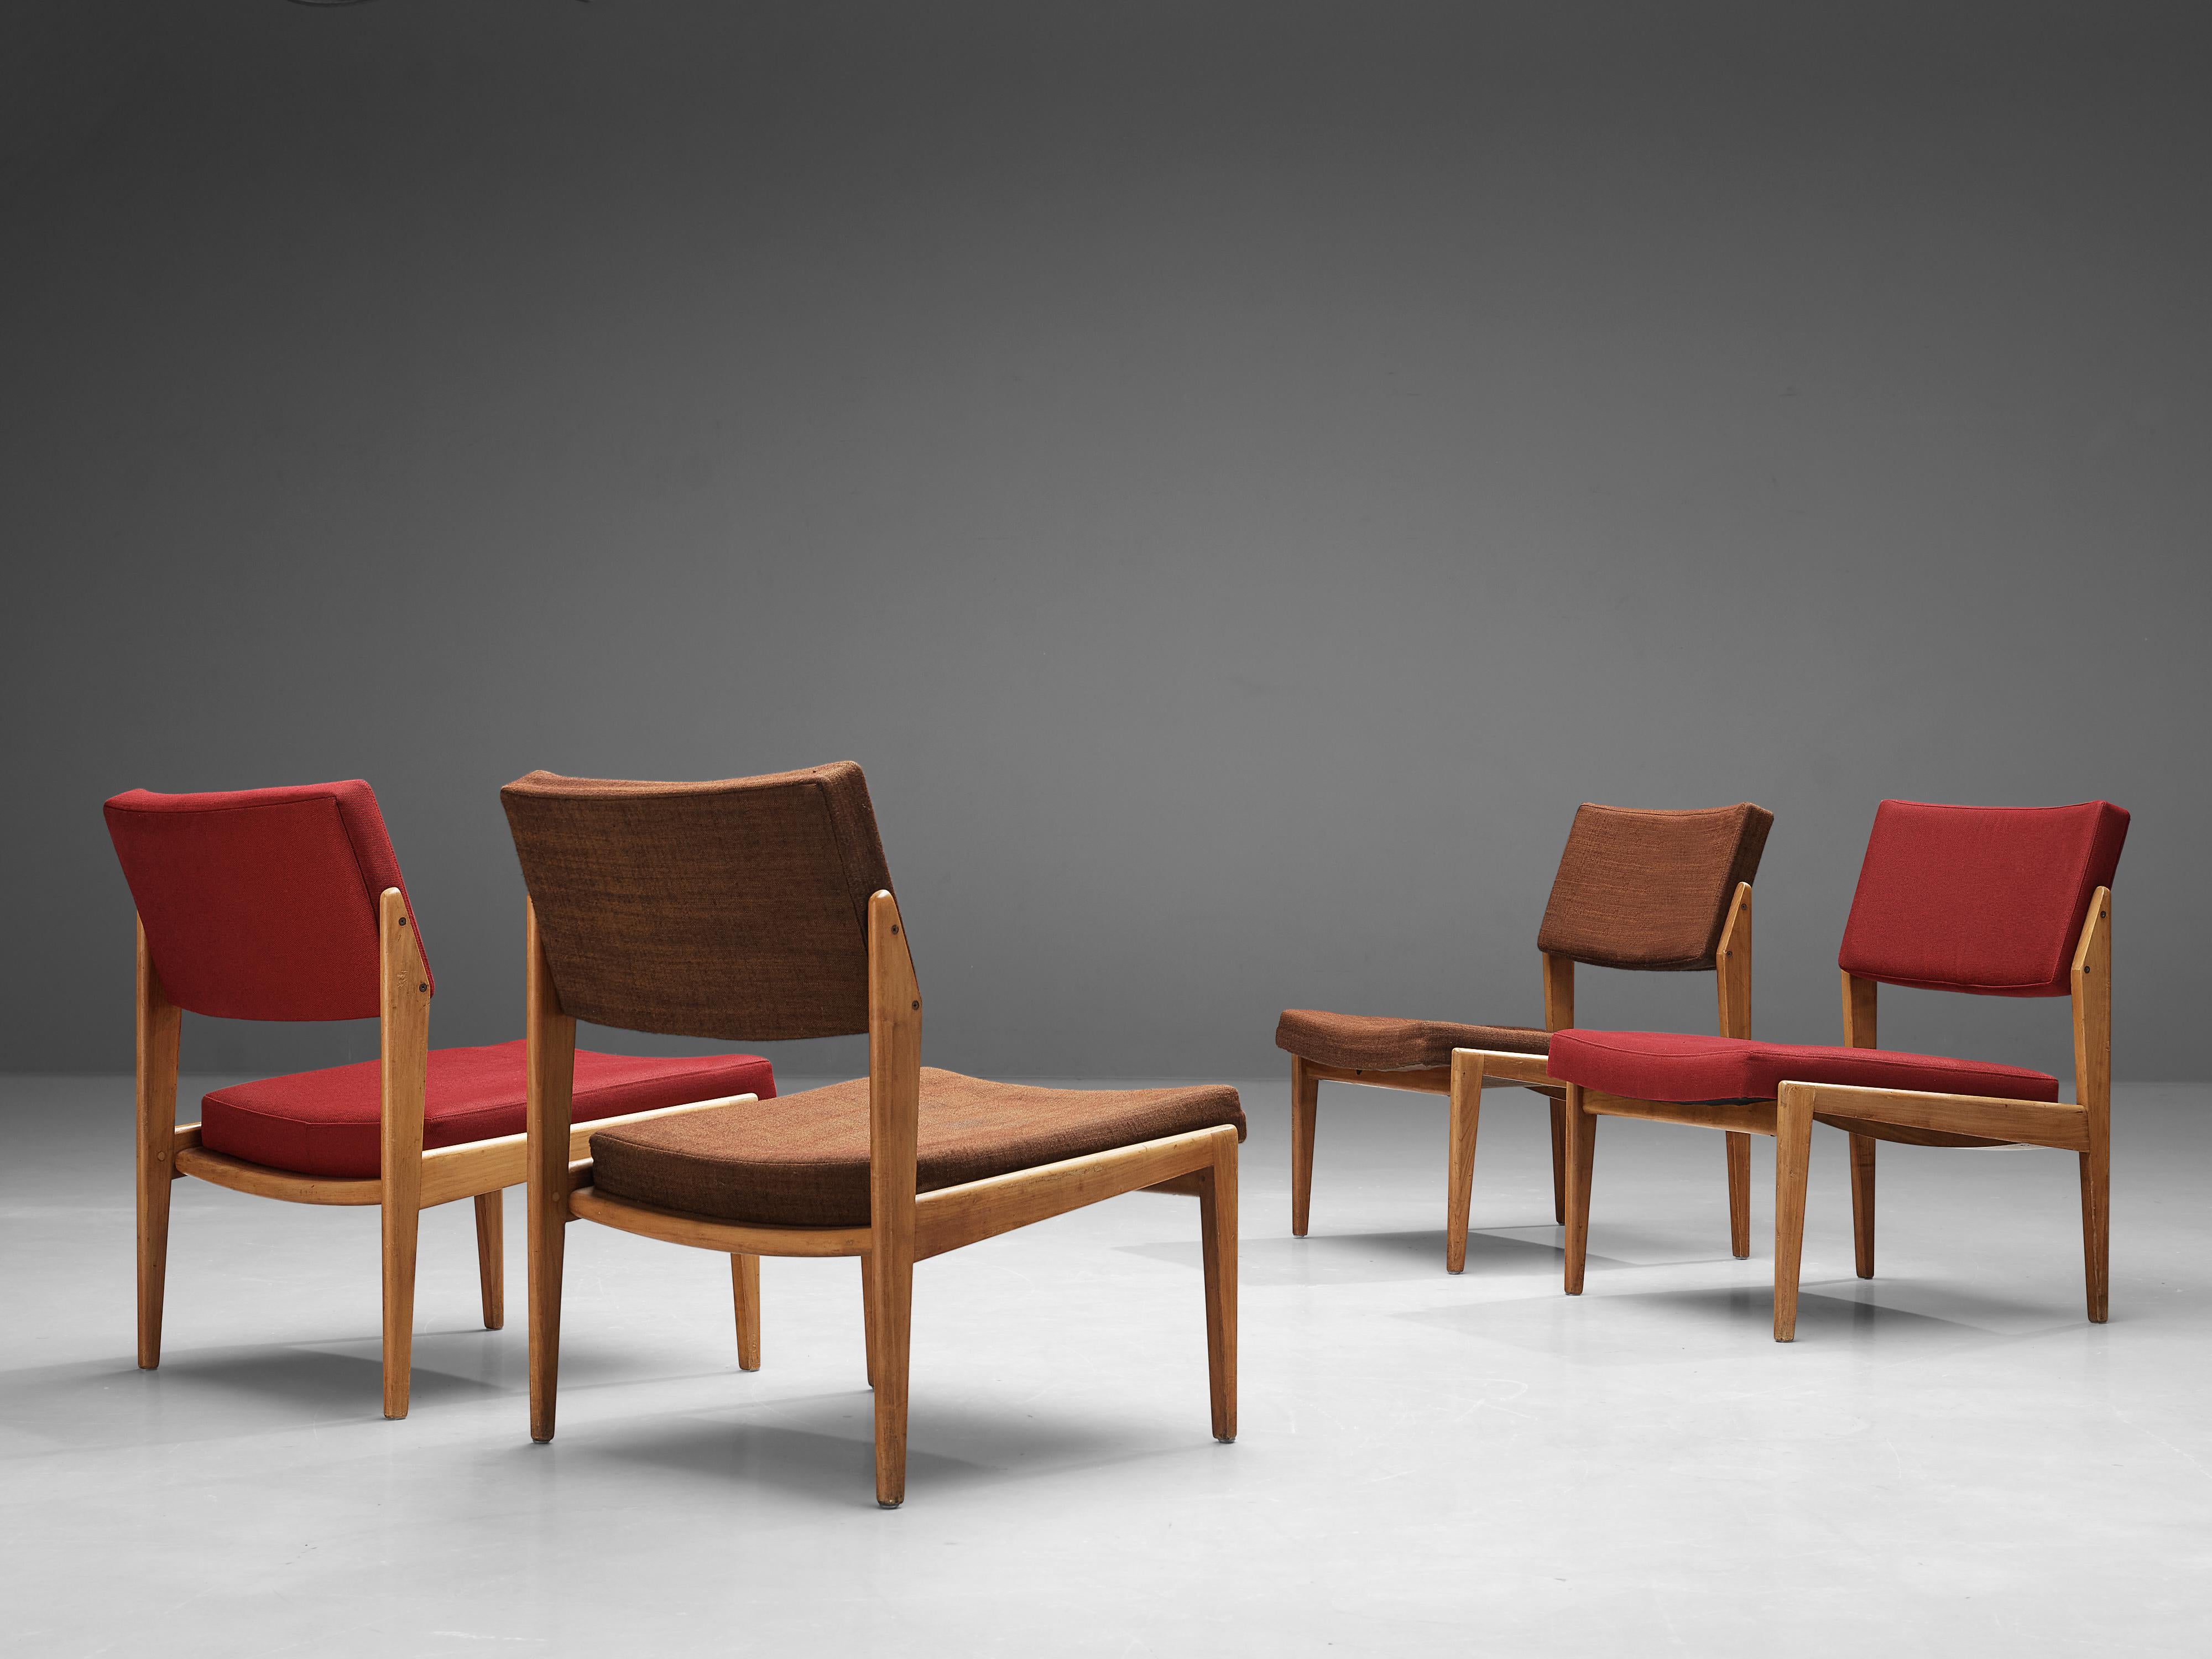 Mid-20th Century Thonet Set of Four Chairs in Cherry and Brown Red Upholstery For Sale